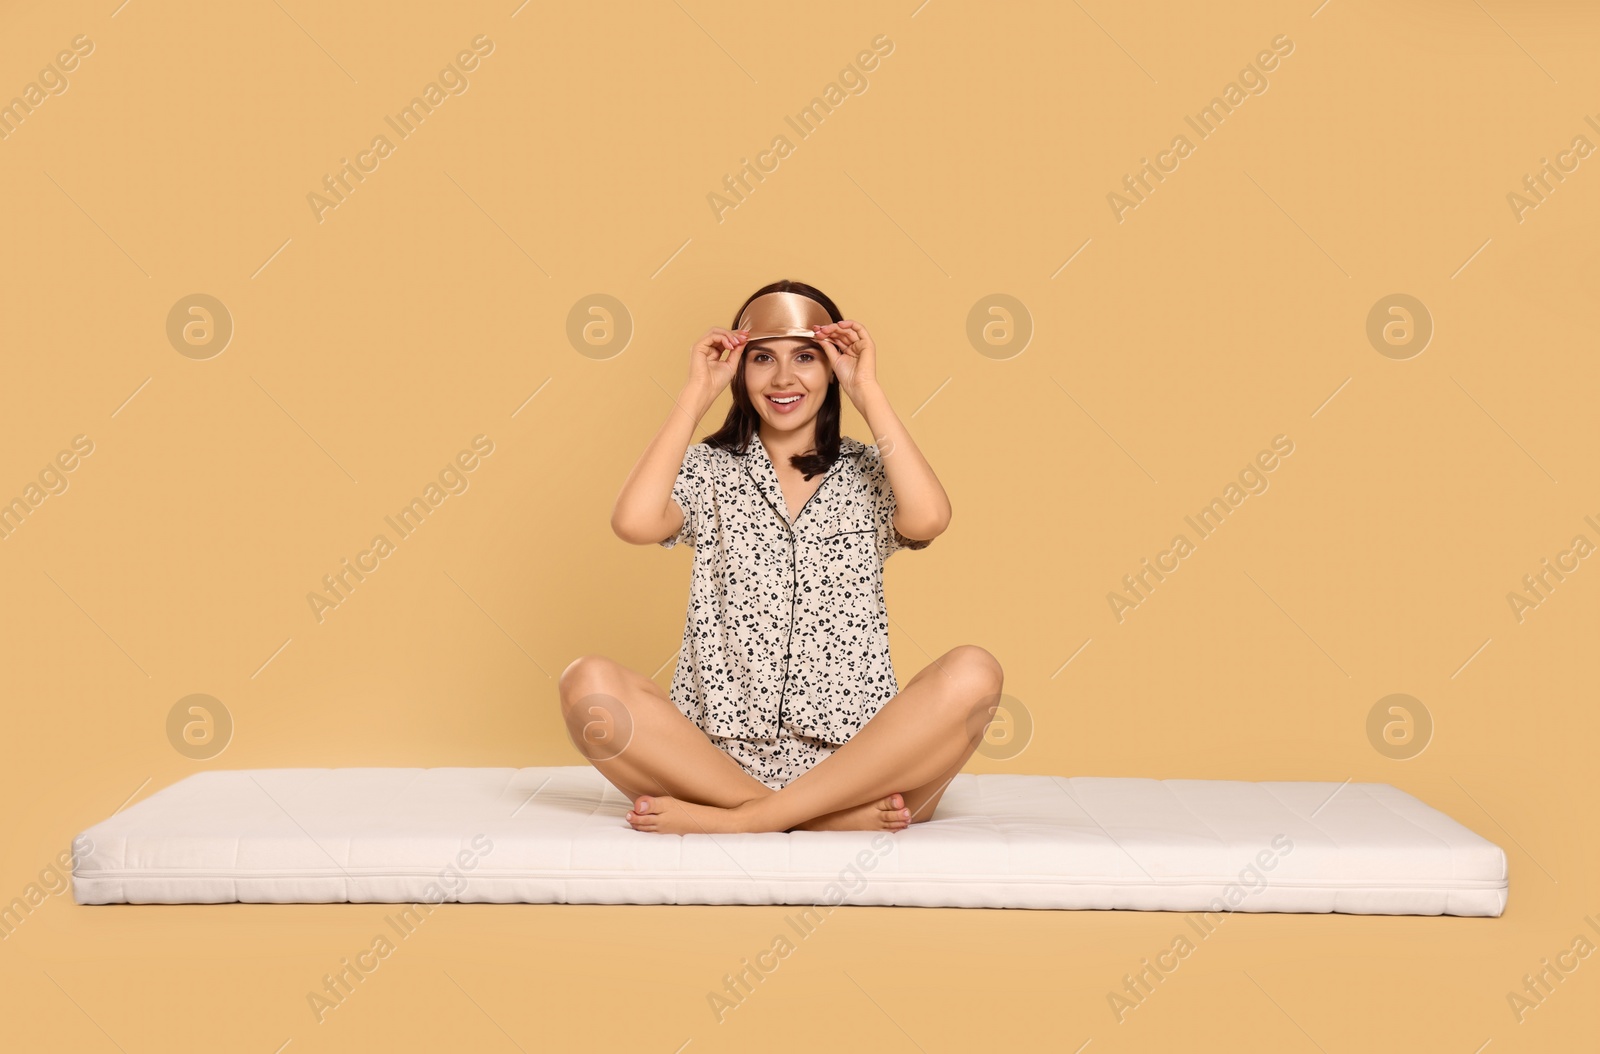 Photo of Woman in sleep mask on soft mattress against beige background